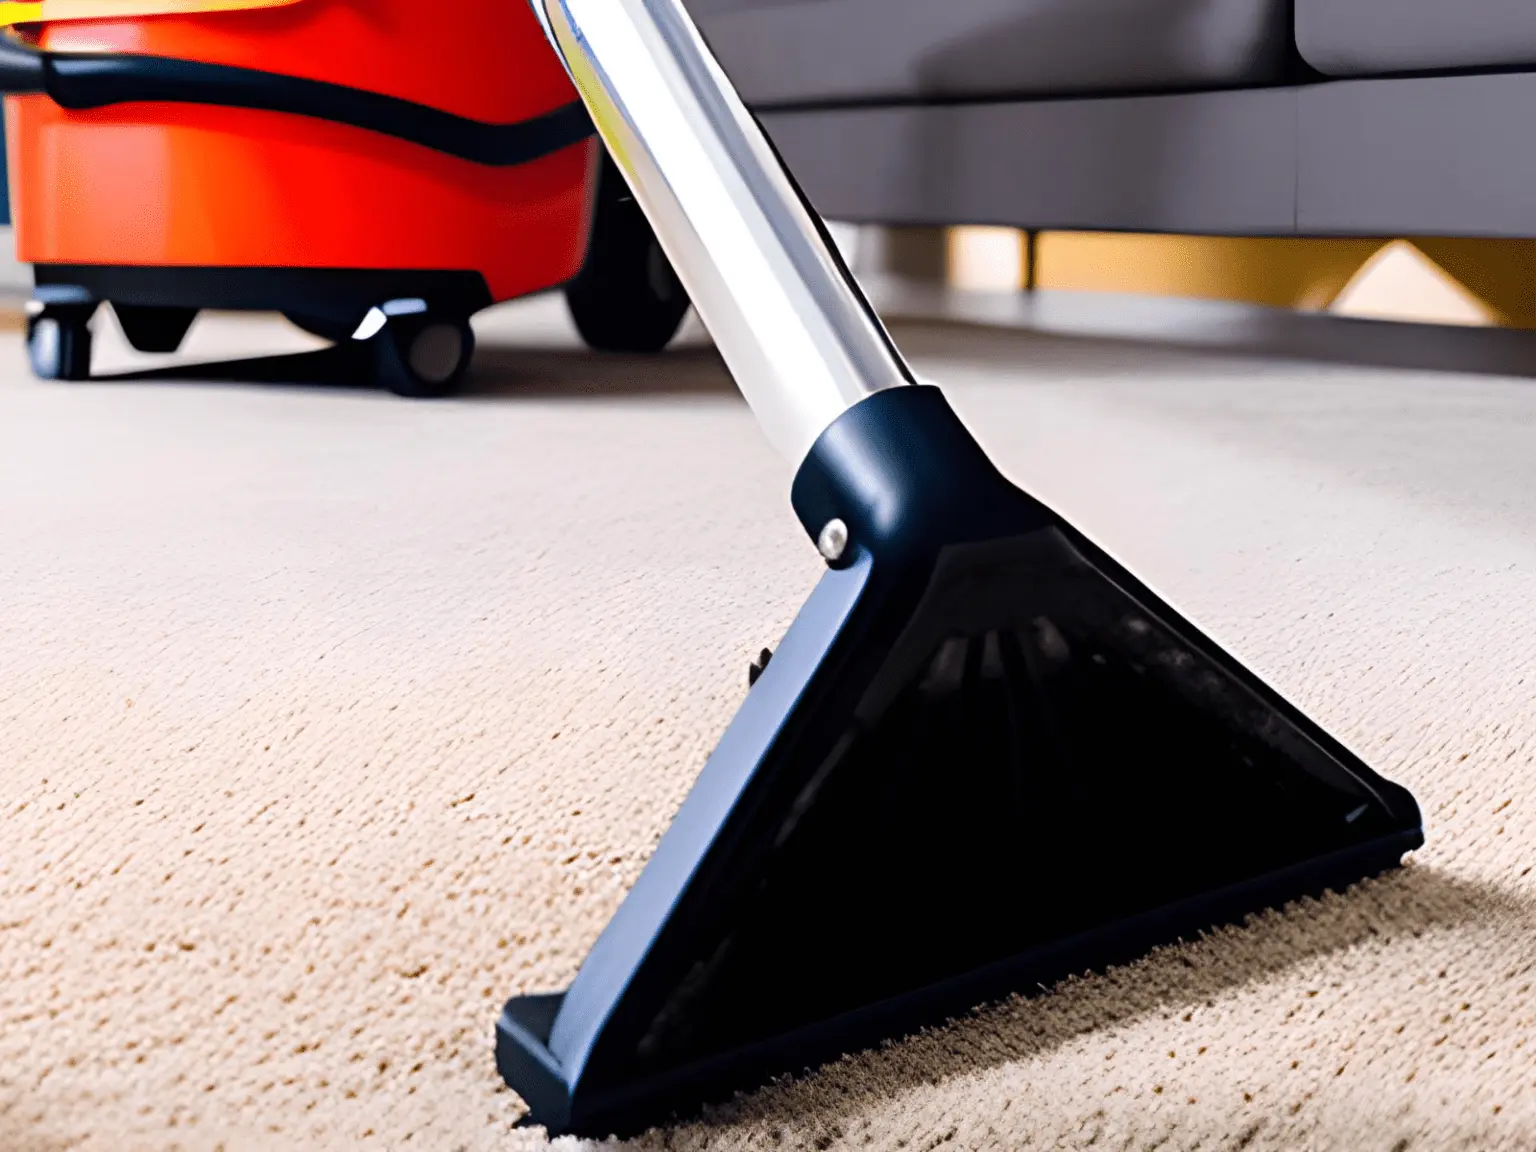 Upholstery Cleaning Vancouver